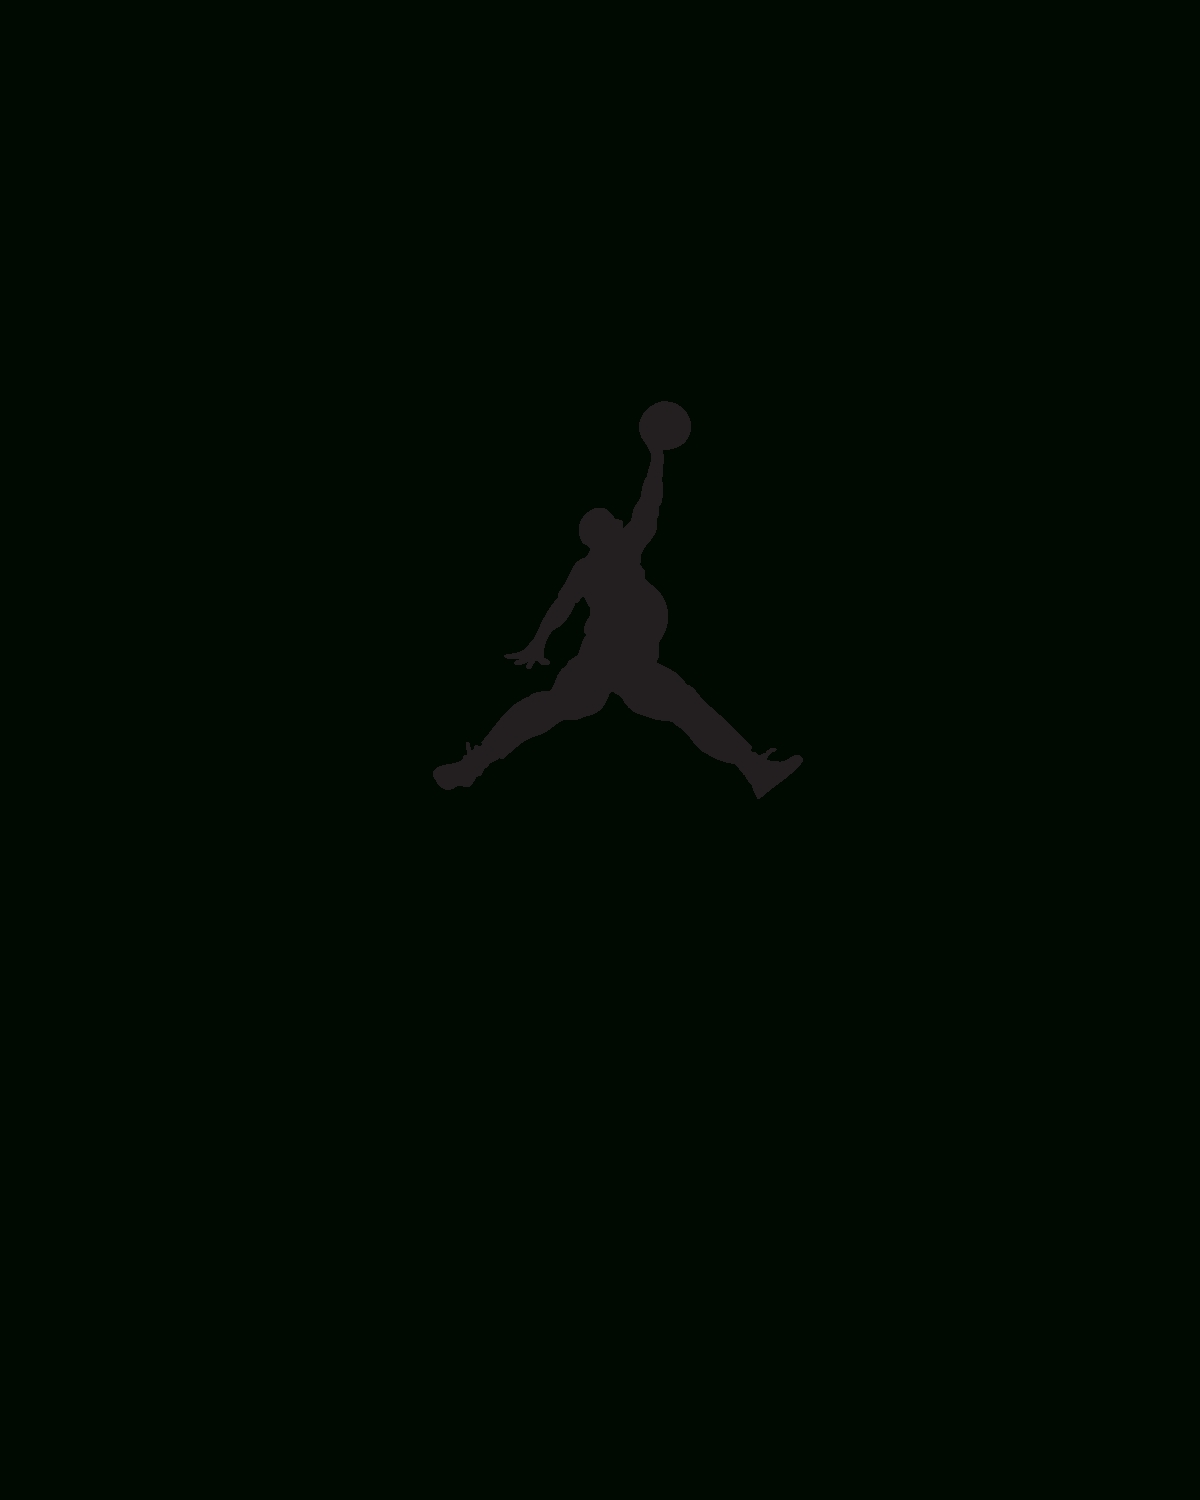 10 New Picture Of Jordan Symbol FULL HD 1920×1080 For PC Background 2020